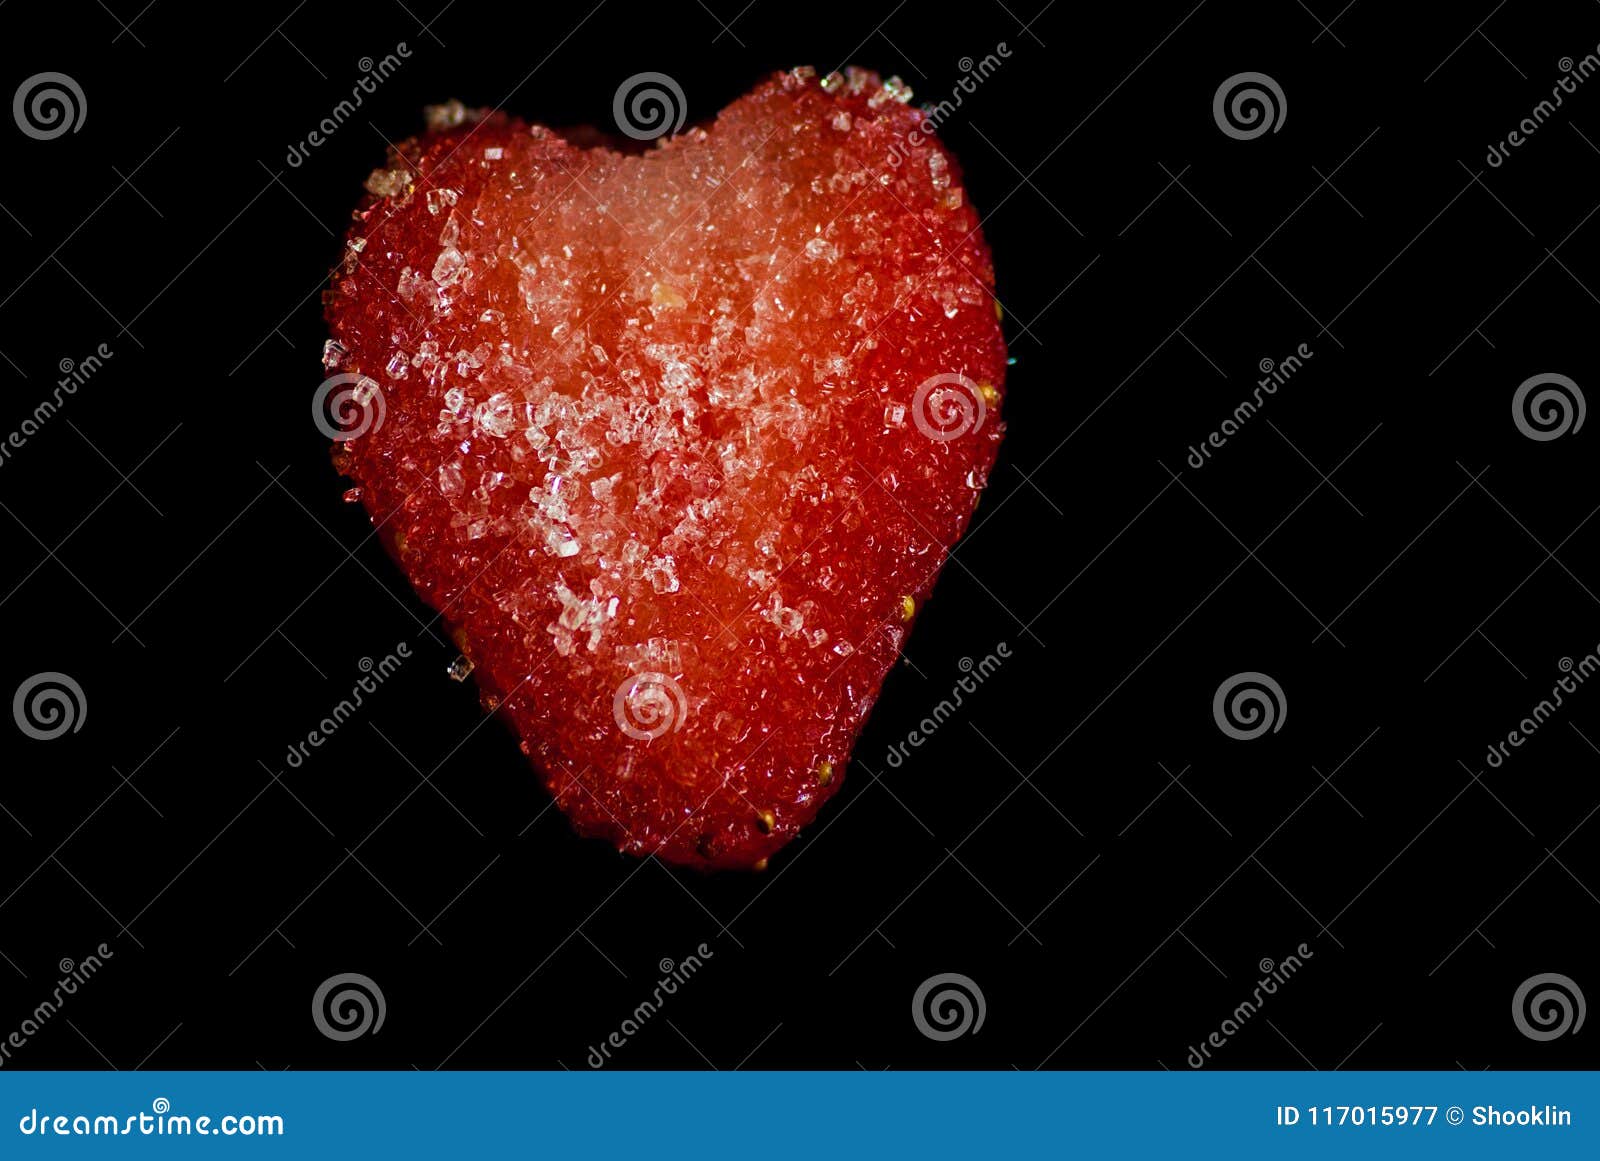 cut slice of a red juicy strawberry covered in sugar crystalls on a black background